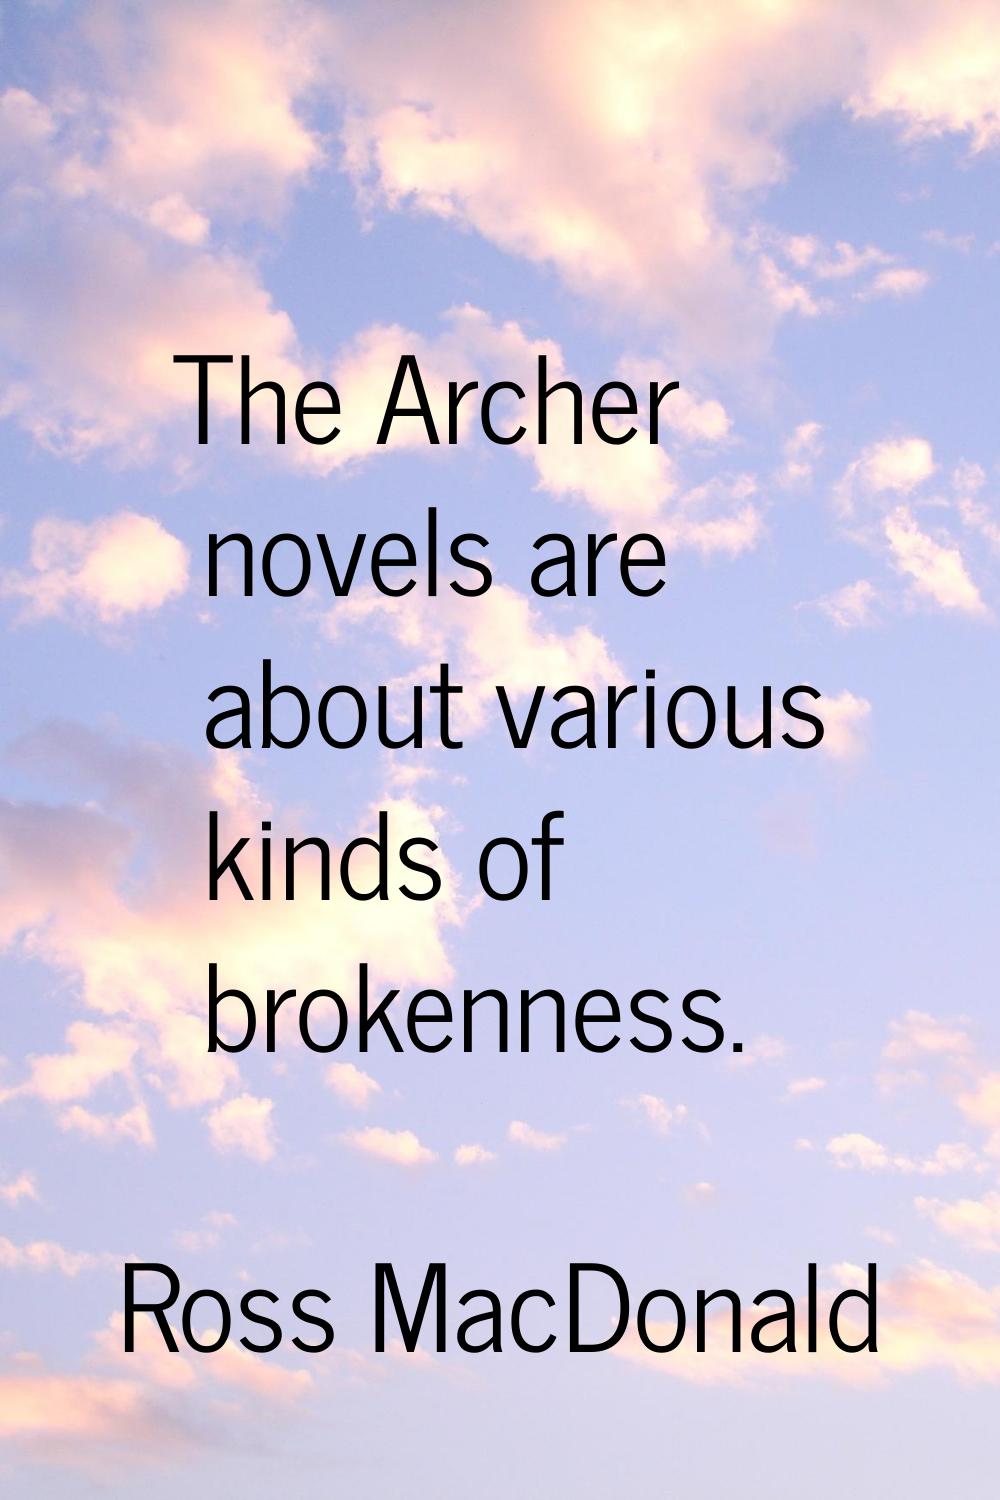 The Archer novels are about various kinds of brokenness.